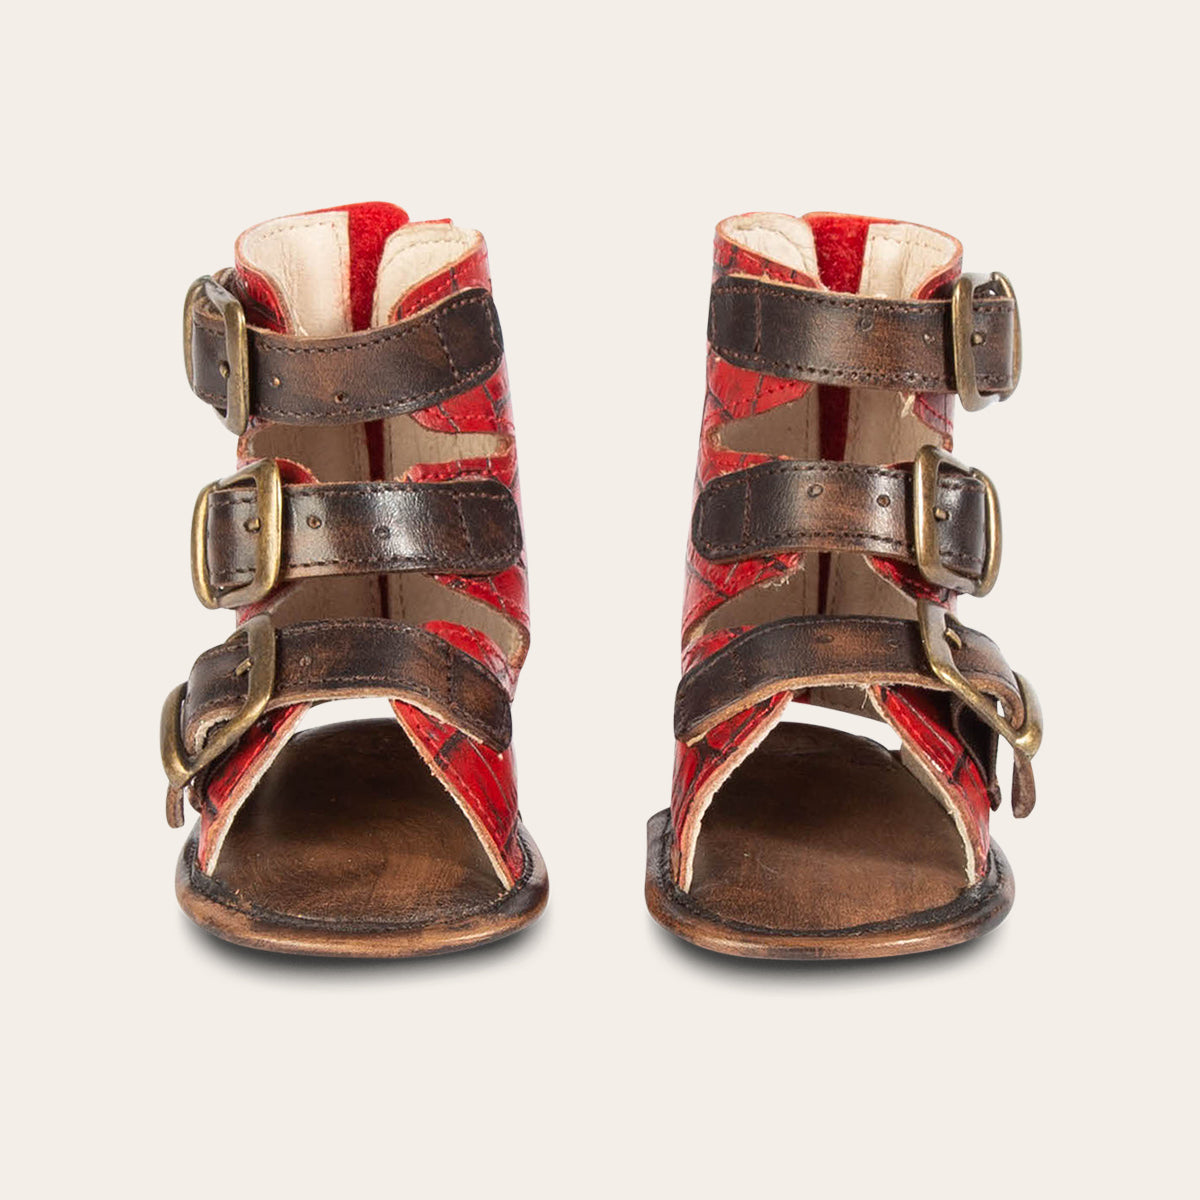 front view showing buckle fashion straps on FREEBIRD infant baby bond red croco sandal